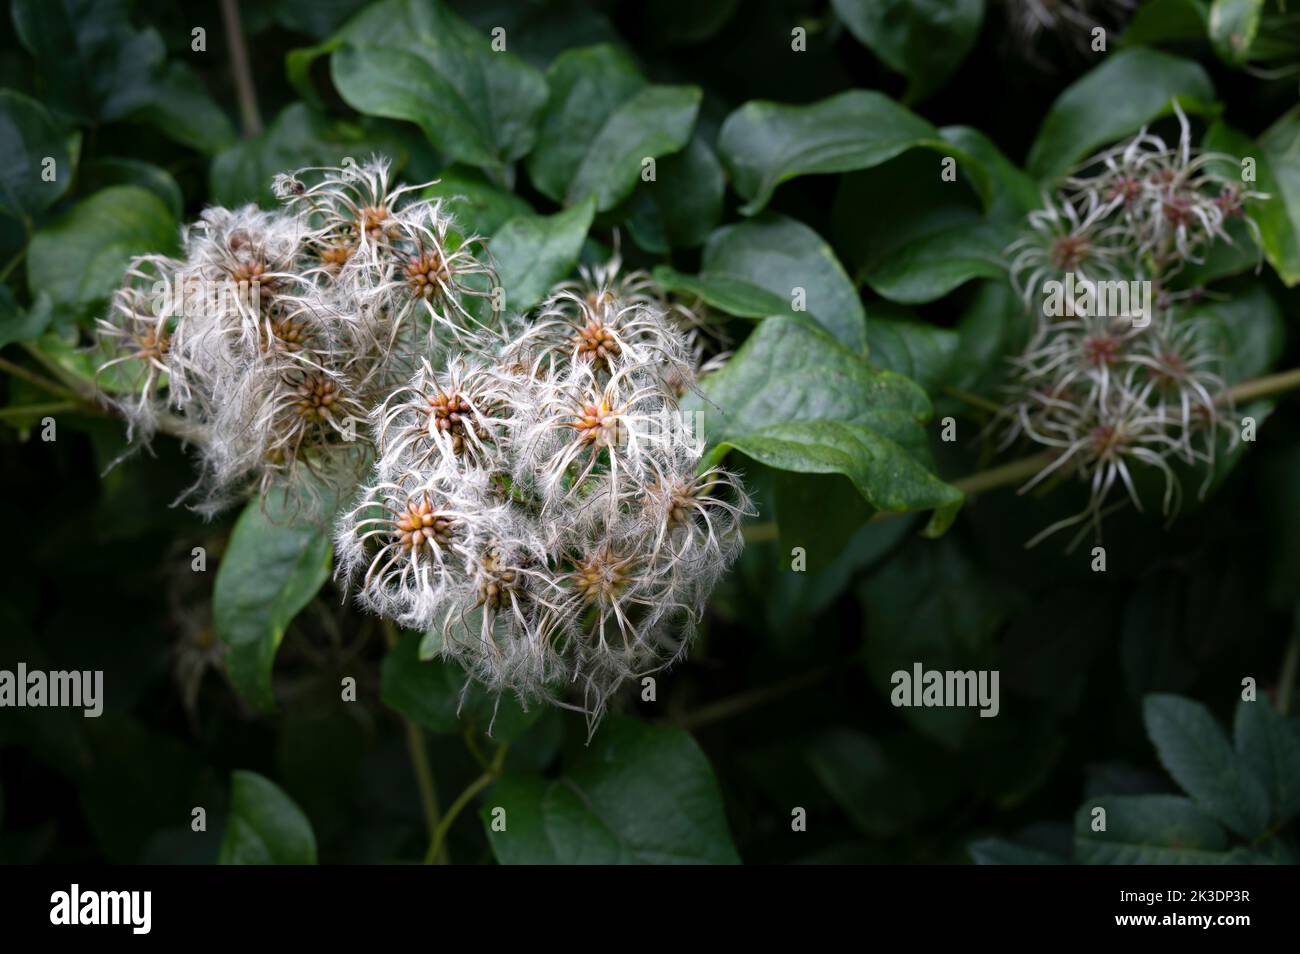 Clematis selvatico o clematis vitalba che cresce in hedgerow inglese in autunno. Foto Stock